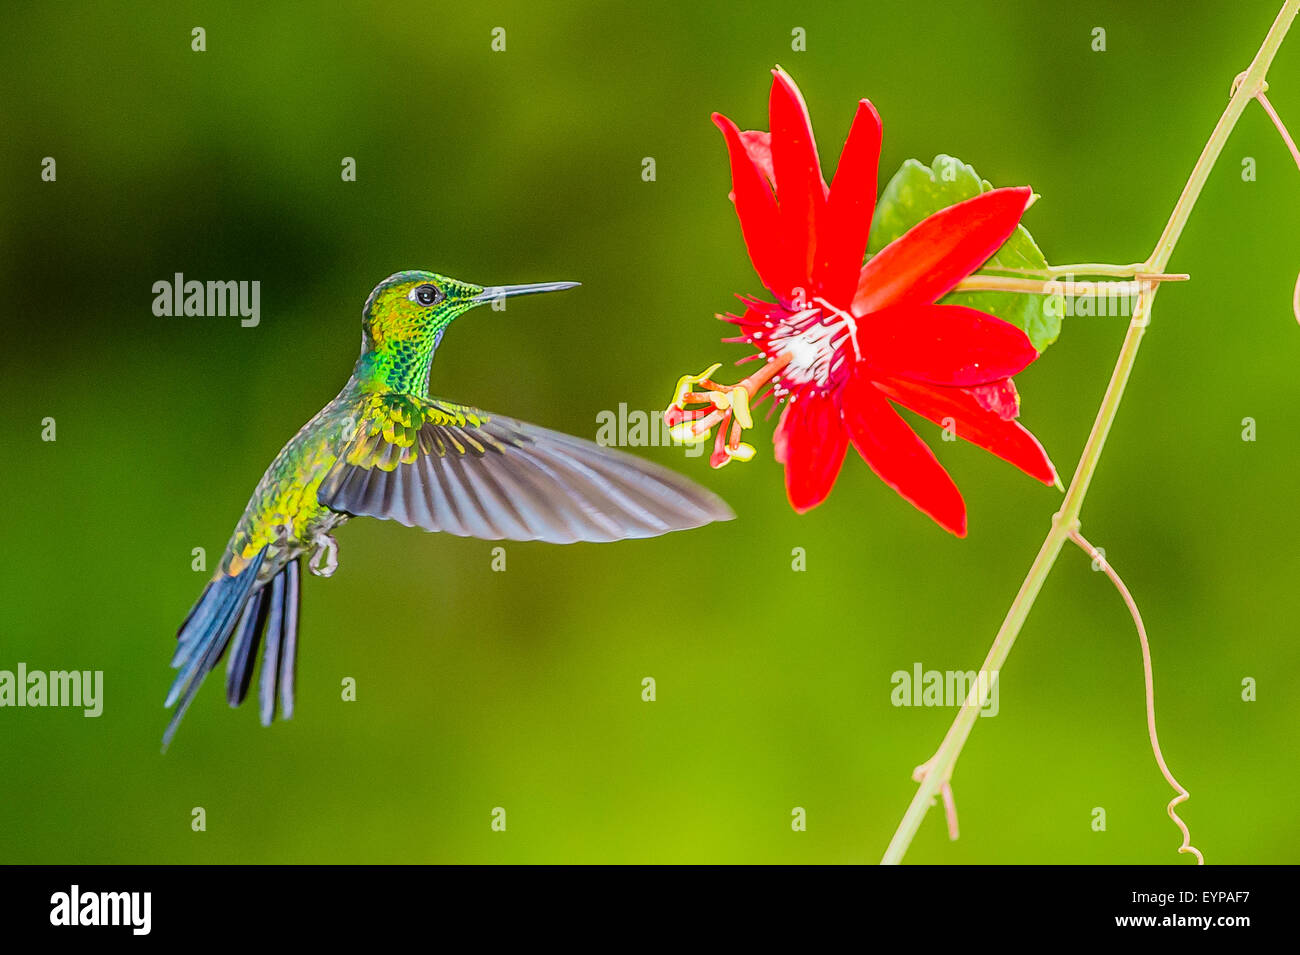 A Green-Crowned Brilliant Hummingbird hovering near a Passion flower Stock Photo